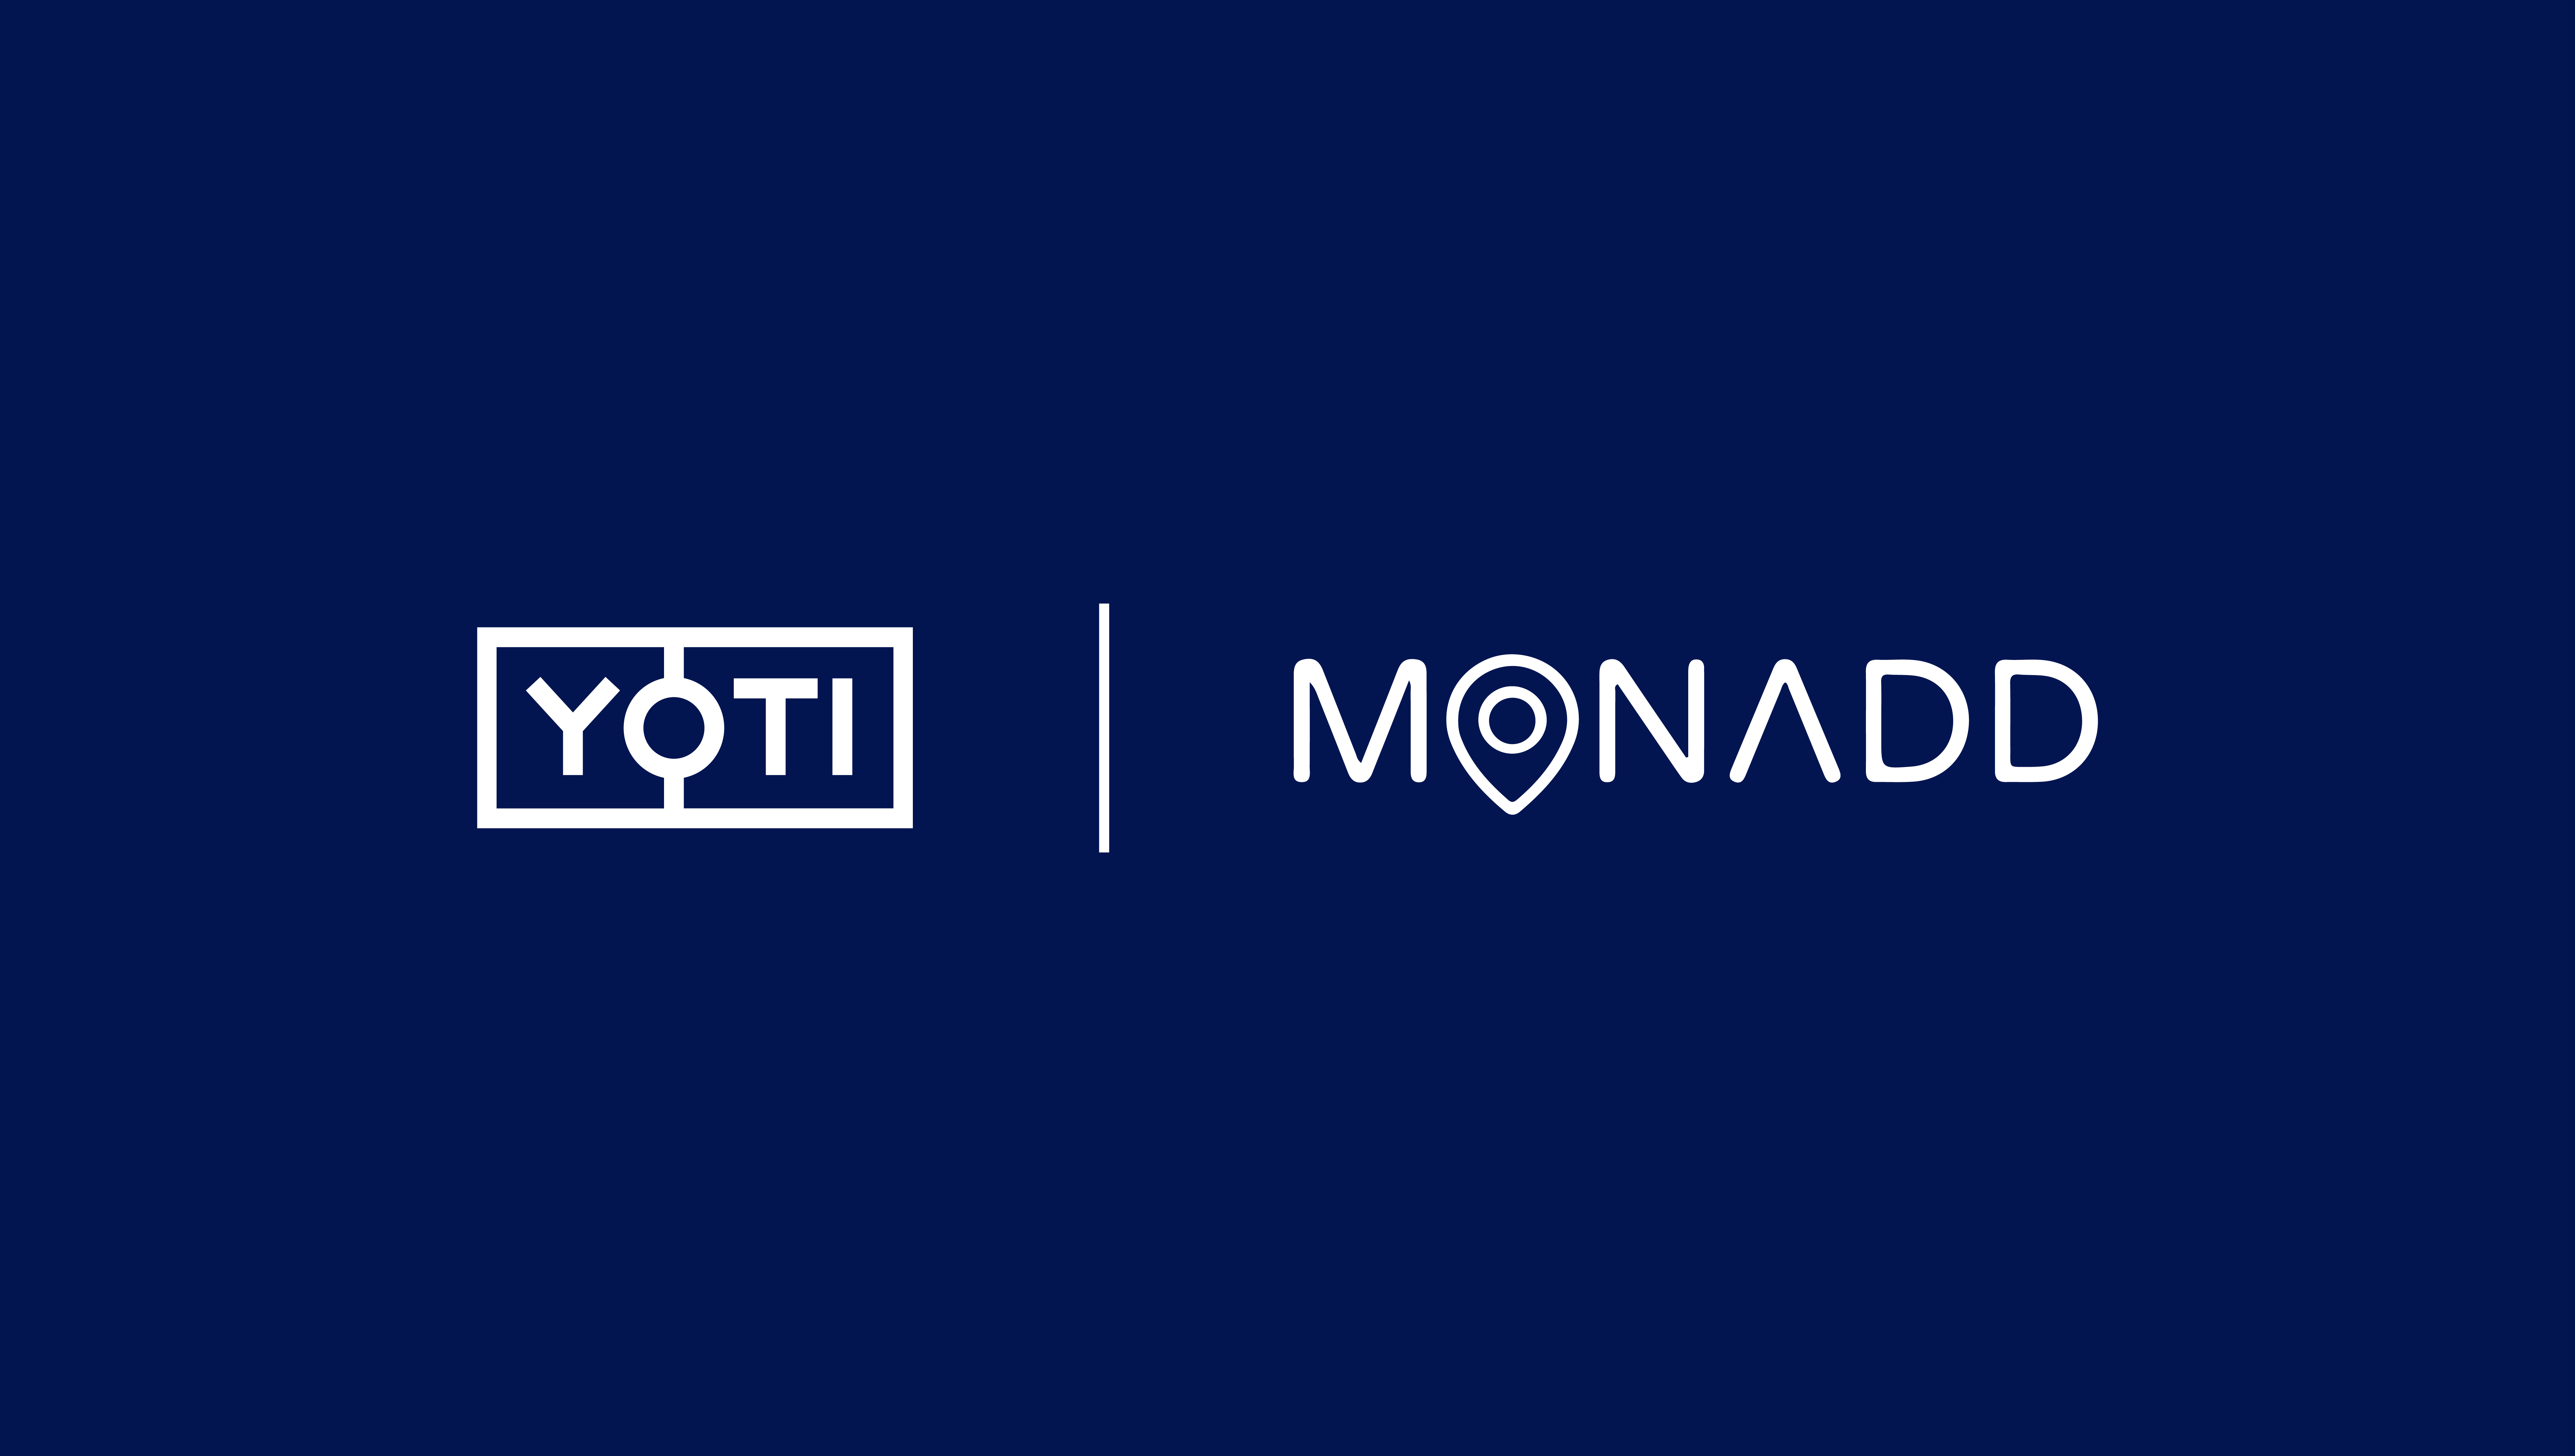 Yoti and Monadd logos presented together